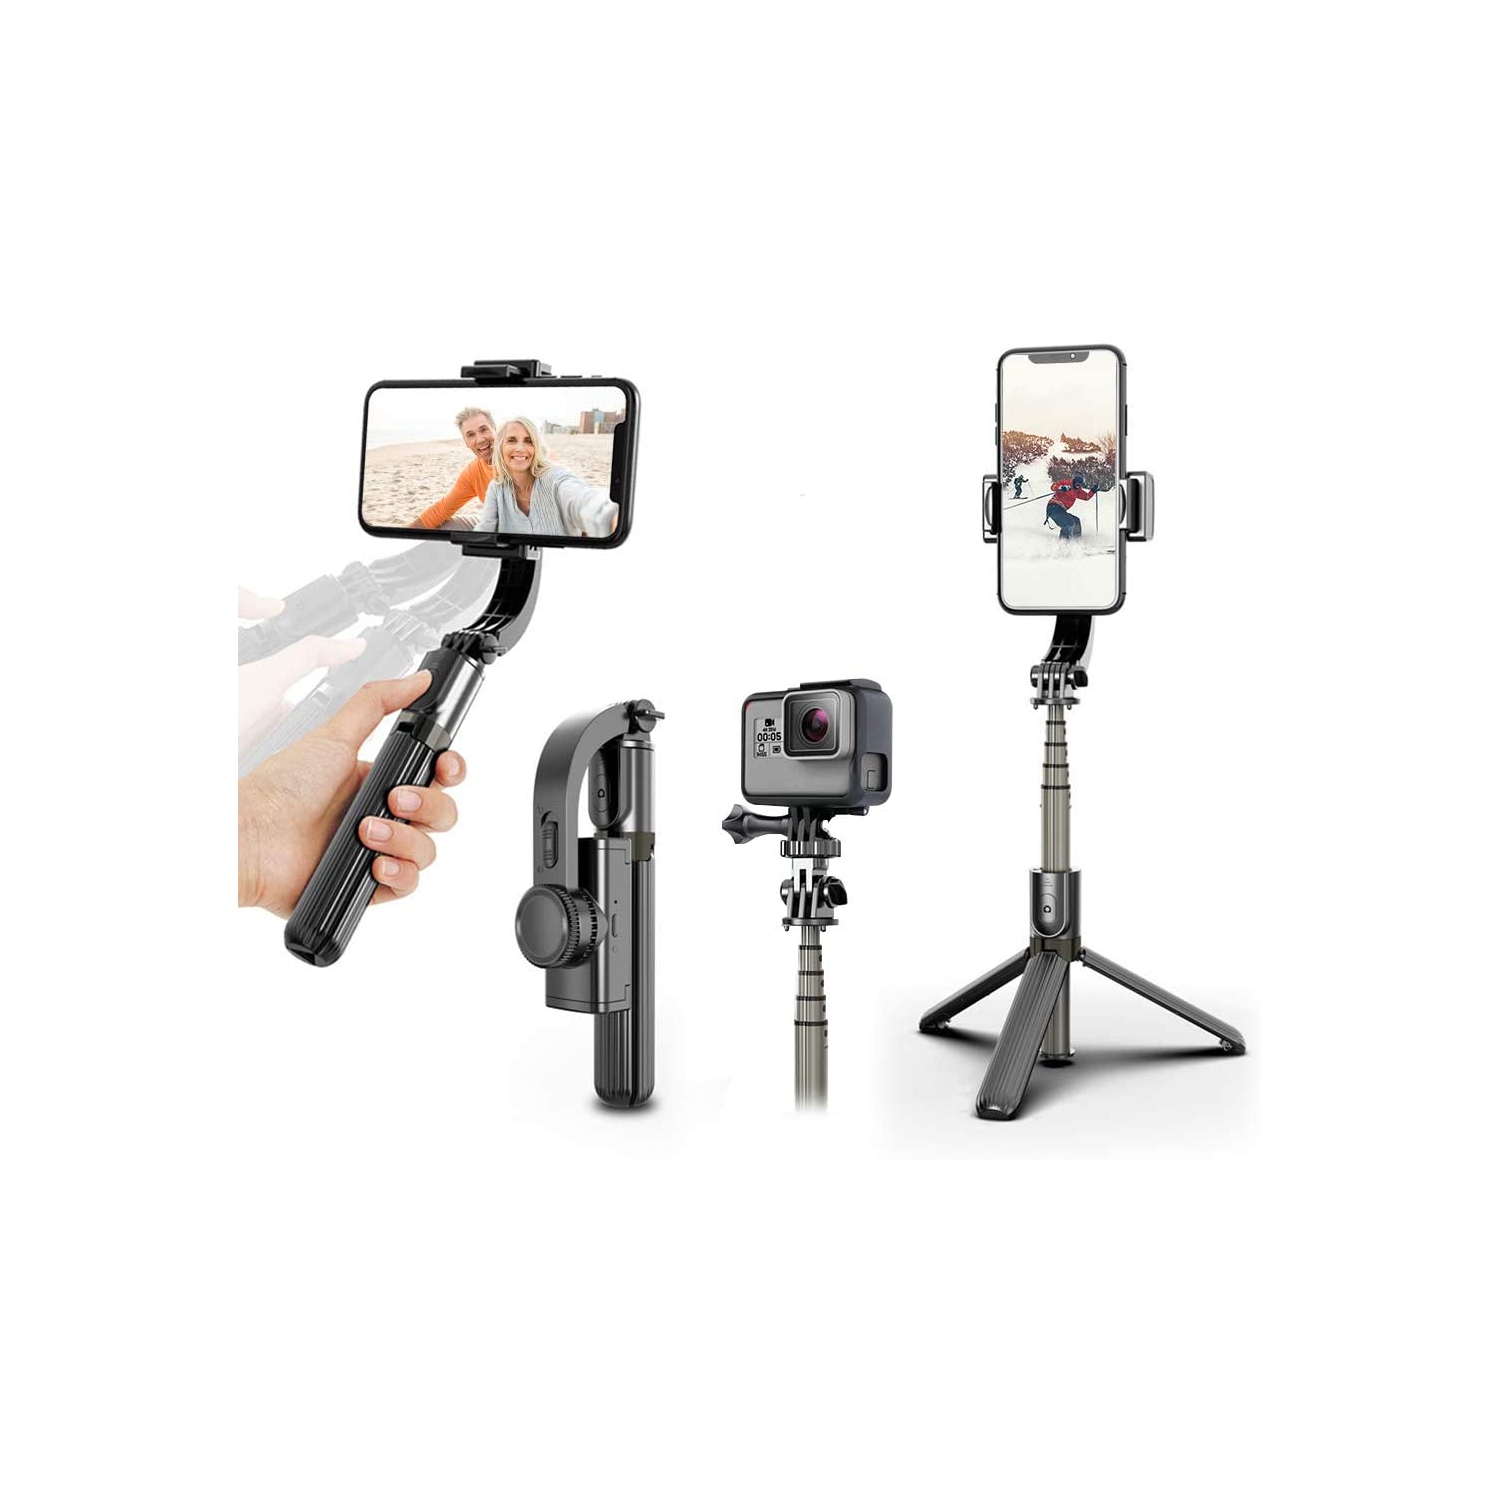 Wingomart Smartphone Camera Stabilizer L08 Handheld with 360°Auto Balance Anti Shake with Built-in Remote Wireless Bluetooth Selfie Stick Pan-tilt Tripod - compatible phone & Gopro stabilizer